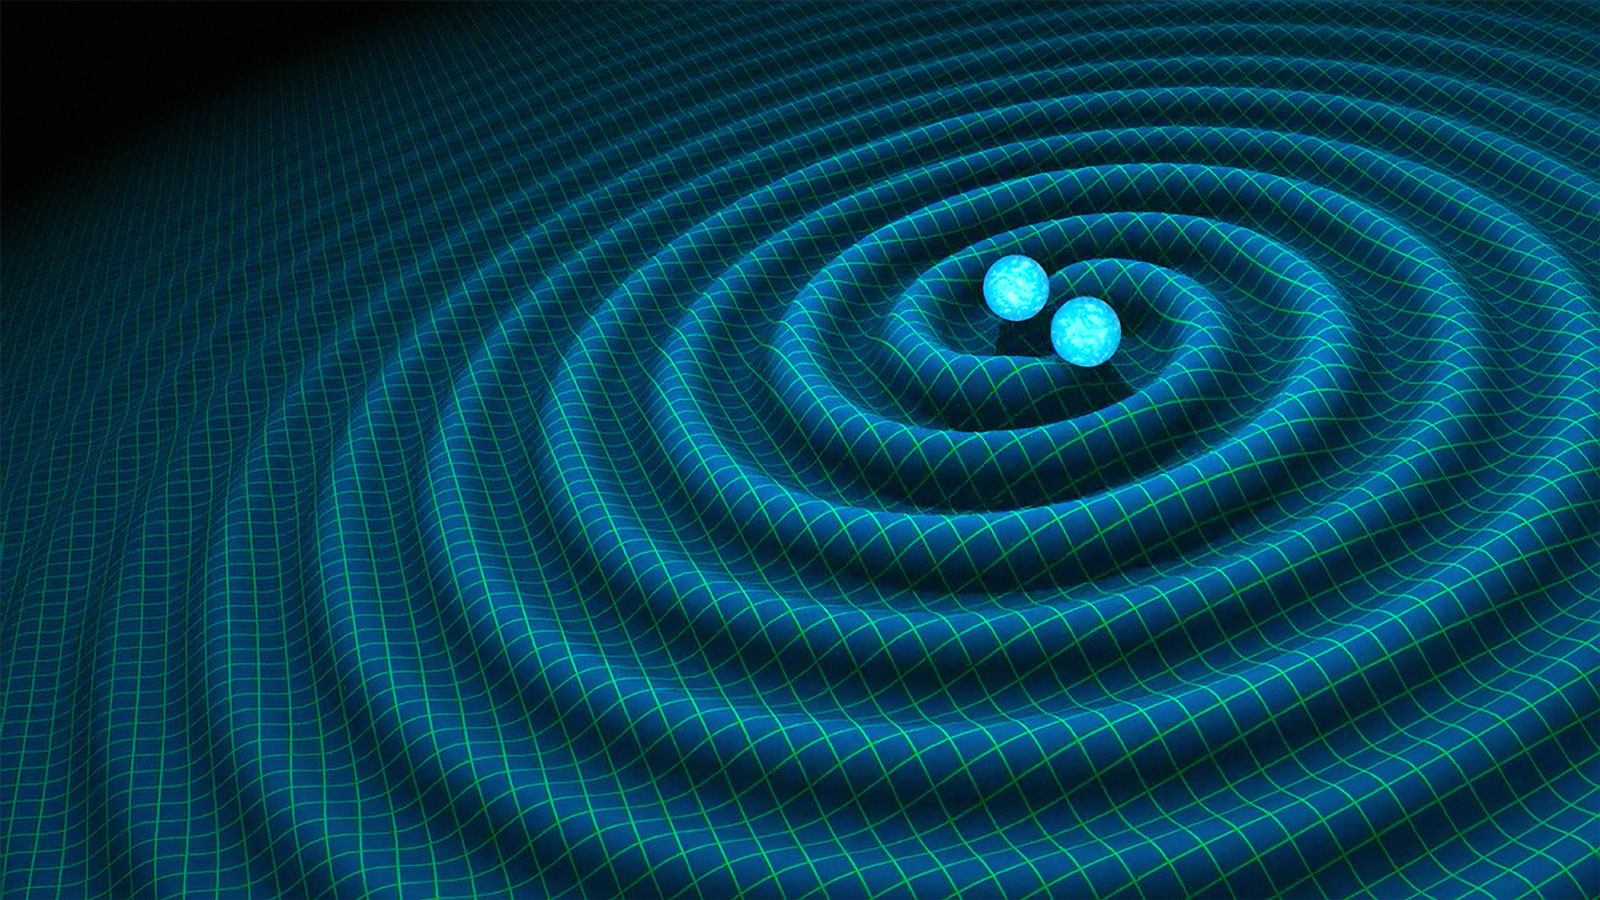 An artist's impression of gravitational waves generated by binary neutron stars.